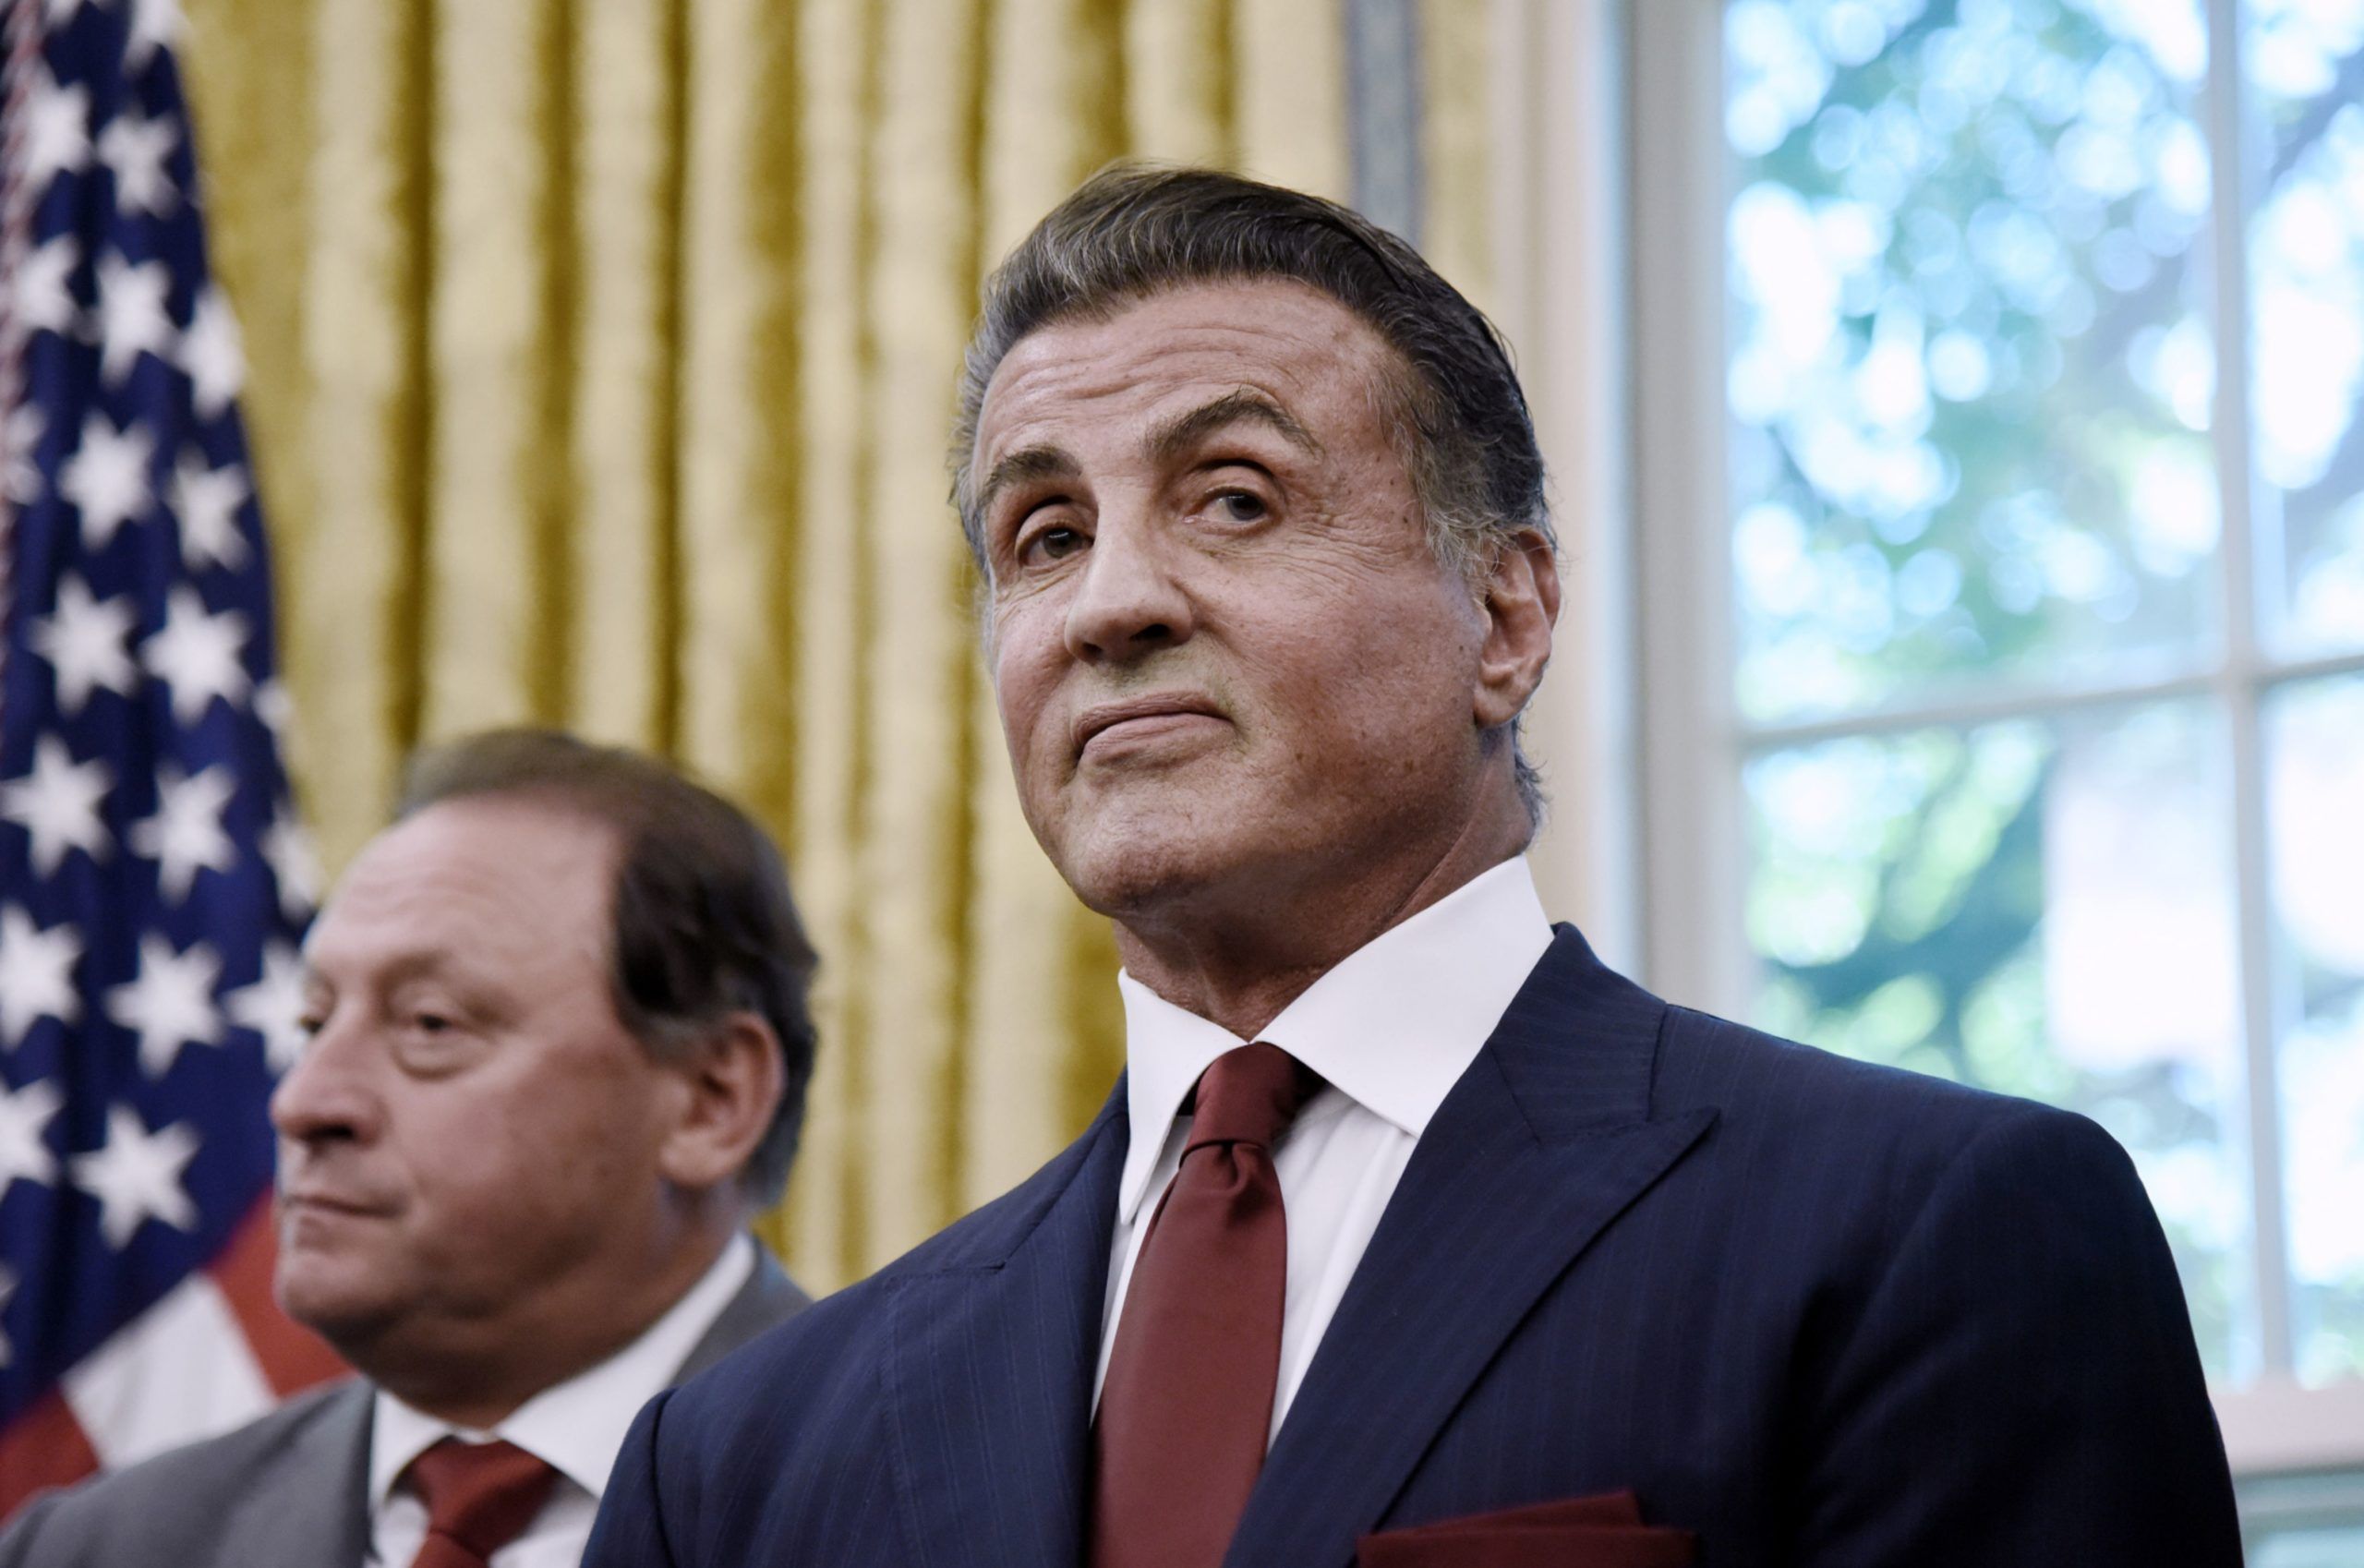 Actor Sylvester Stallone attends the signing of an executive order 